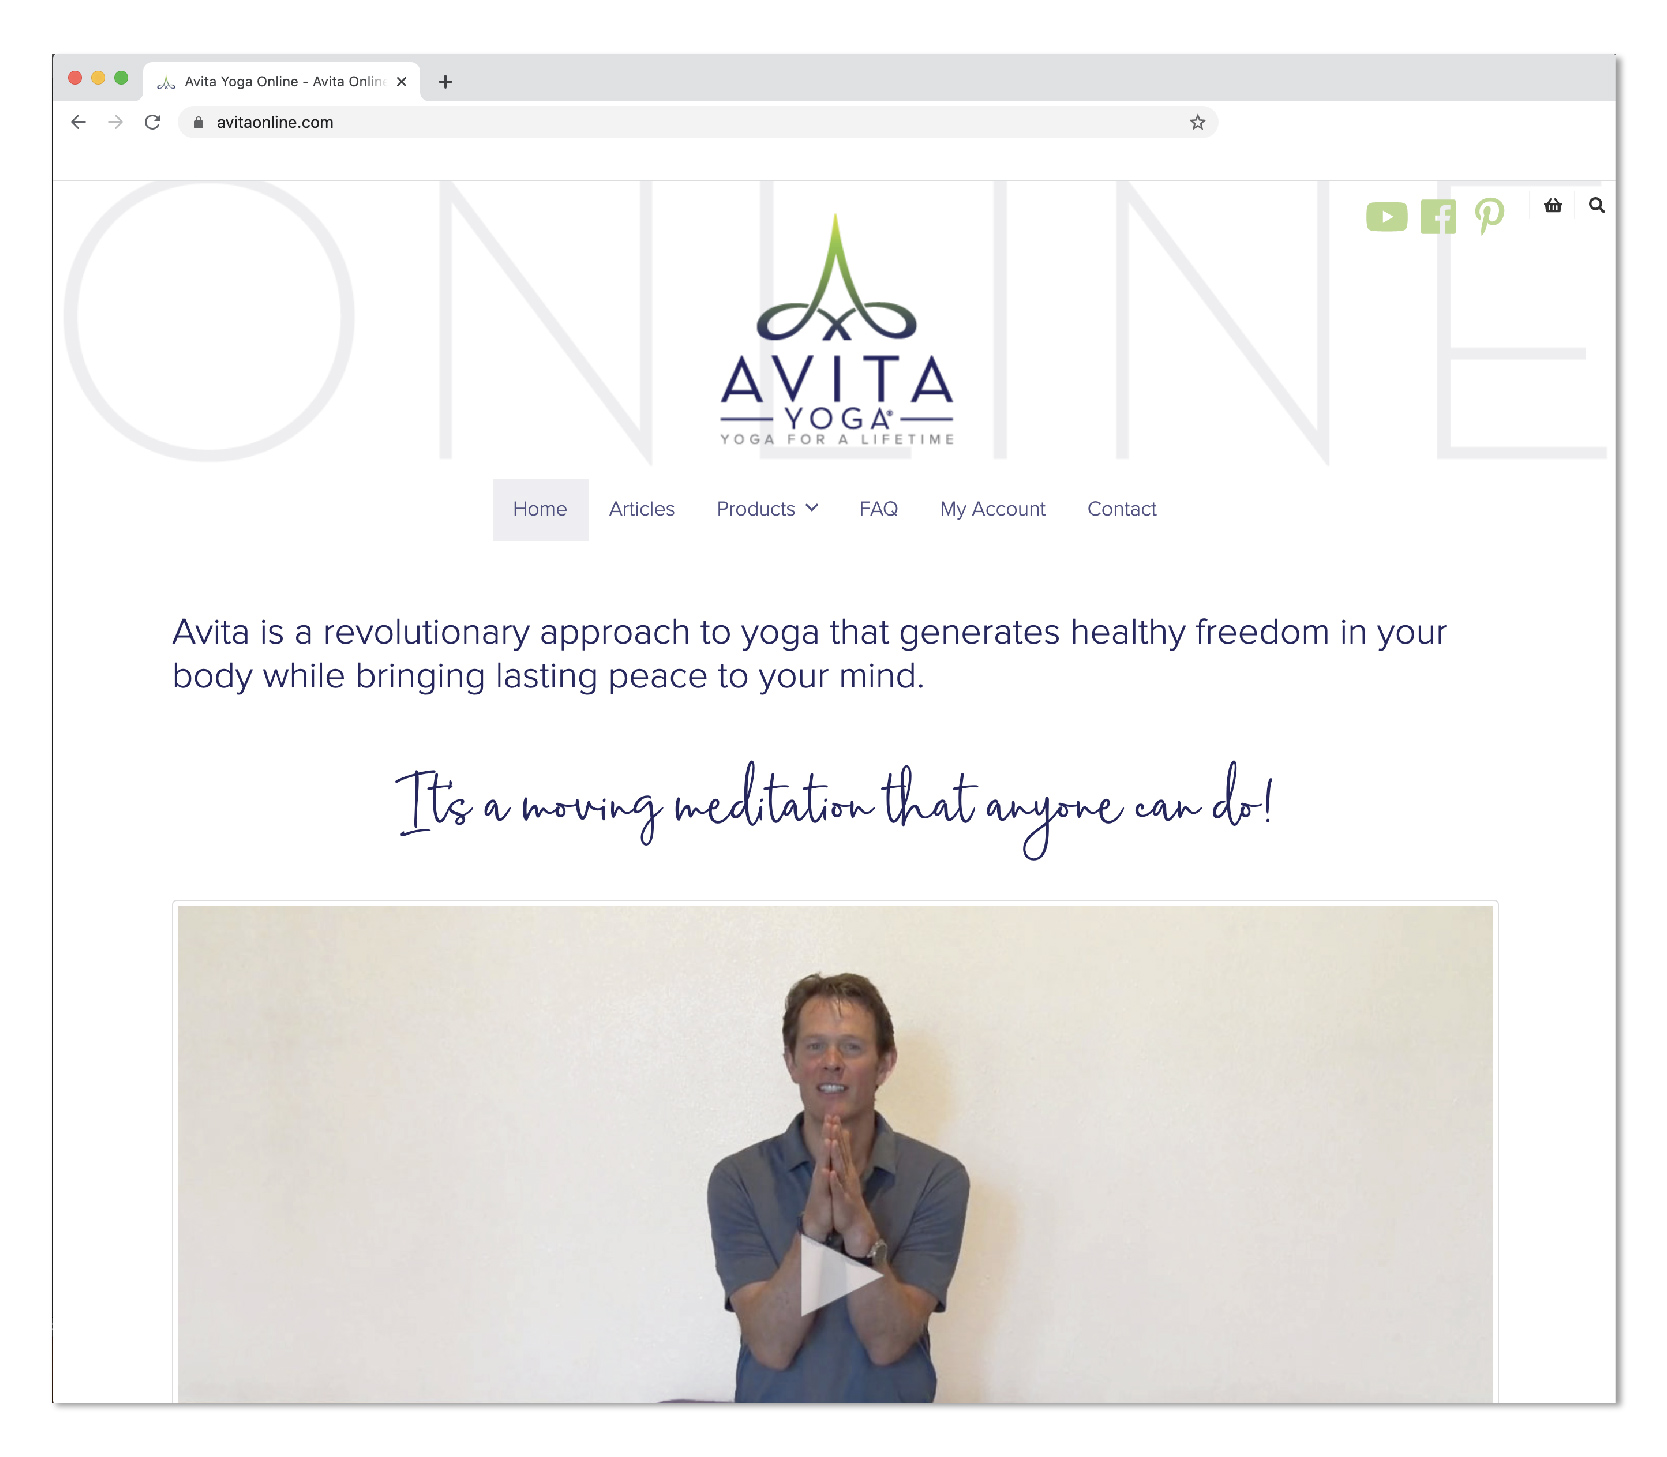 Custom web dev of your online ecommerce store from the portfolio of DesignINk igital with Avita Yoga and Jeff Bailey